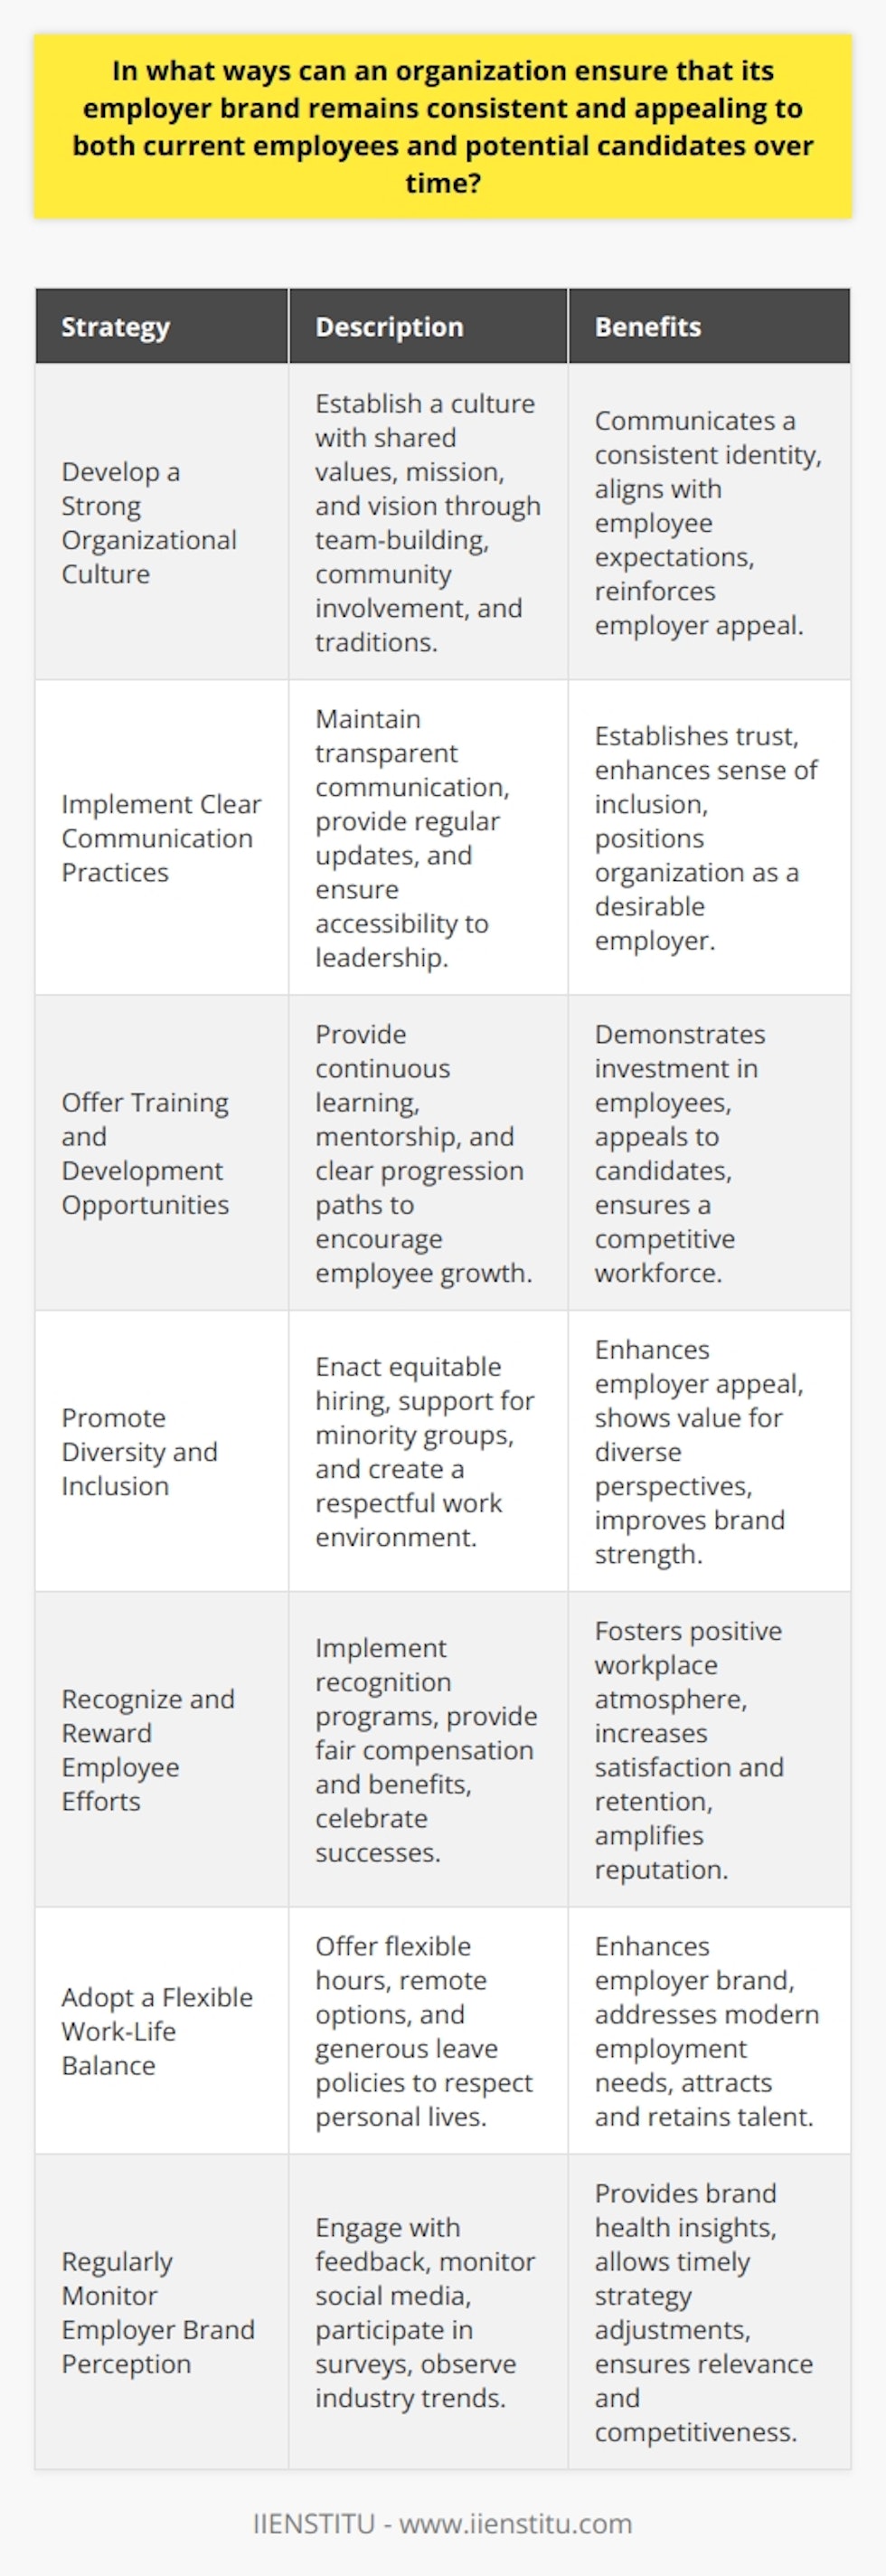 An organization's employer brand is a critical asset in the recruitment and retention of high-caliber employees. In a competitive job market, maintaining a consistent and appealing employer brand is essential. Here are several strategies organizations can adopt to preserve and strengthen their employer brand over time.Develop a Strong Organizational CultureOrganizational culture is the heartbeat of an employer brand. A robust culture is characterized by a shared set of values, mission, and vision that resonates with employees and candidates. Organizations should undertake initiatives like team-building activities, community involvement, and uphold traditions that reinforce their values. These initiatives communicate a strong, consistent identity that aligns with the expectations and ambitions of its workforce.Implement Clear Communication PracticesClear and transparent communication practices are instrumental for an organization. Employees should feel they are well-informed about the company's goals and their own roles in achieving them. Regular updates, open channels for feedback, and accessibility to leadership encourage a sense of inclusion and investment in the company's future. This level of transparency establishes trust and positions the organization as an honest and desirable employer.Offer Training and Development OpportunitiesEmployees seek personal and professional growth, and an employer that provides these opportunities stands out. Offering continuous learning, mentorship programs, and clear progression paths not only demonstrate an investment in employee development but also appeal to potential candidates eager for growth. Furthermore, these opportunities help keep the organization competitive by ensuring its workforce's skills remain cutting edge.Promote Diversity and InclusionA diverse and inclusive work environment is critical for a strong employer brand. Organizations that actively work on creating inclusive environments show they value multiple perspectives and backgrounds, directly enhancing their appeal. Efforts should include equitable hiring practices, support for minority groups, and creating an environment where all voices are respected and heard.Recognize and Reward Employee EffortsA culture that recognizes and rewards efforts fosters a positive workplace atmosphere, leading to greater employee satisfaction and retention. Innovative recognition programs, coupled with fair compensation and benefits, affirm an organization's commitment to its employees. Publicly celebrating successes large and small reinforces the organizational values and amplifies its reputation as a desirable place to work.Adopt a Flexible Work-Life BalanceFlexibility is increasingly seen as a non-negotiable aspect of modern employment. Adapting to the changing needs of the workforce by offering flexible hours, remote working options, or generous parental leave can significantly enhance an employer brand. These offerings show that an organization understands and respects the personal lives of its employees, which is a powerful draw for both current and prospective staff.Regularly Monitor Employer Brand PerceptionLastly, an organization must continually assess how its employer brand is perceived both internally and externally. Engaging with employee feedback, monitoring social media, participating in workplace surveys, and observing industry trends provides insights into the brand’s health. This proactive approach allows organizations to make timely adjustments to their strategies, ensuring their employer brand remains relevant and competitive.Instituting these practices demonstrates a commitment to upholding a high-quality employer brand. Organizations like IIENSTITU, known for educational and professional development, can serve as a resource for implementing these strategies through expert-led courses and training programs. By keeping the employer brand consistently authentic, engaging, and responsive to change, organizations position themselves to attract and retain the very best talent available.